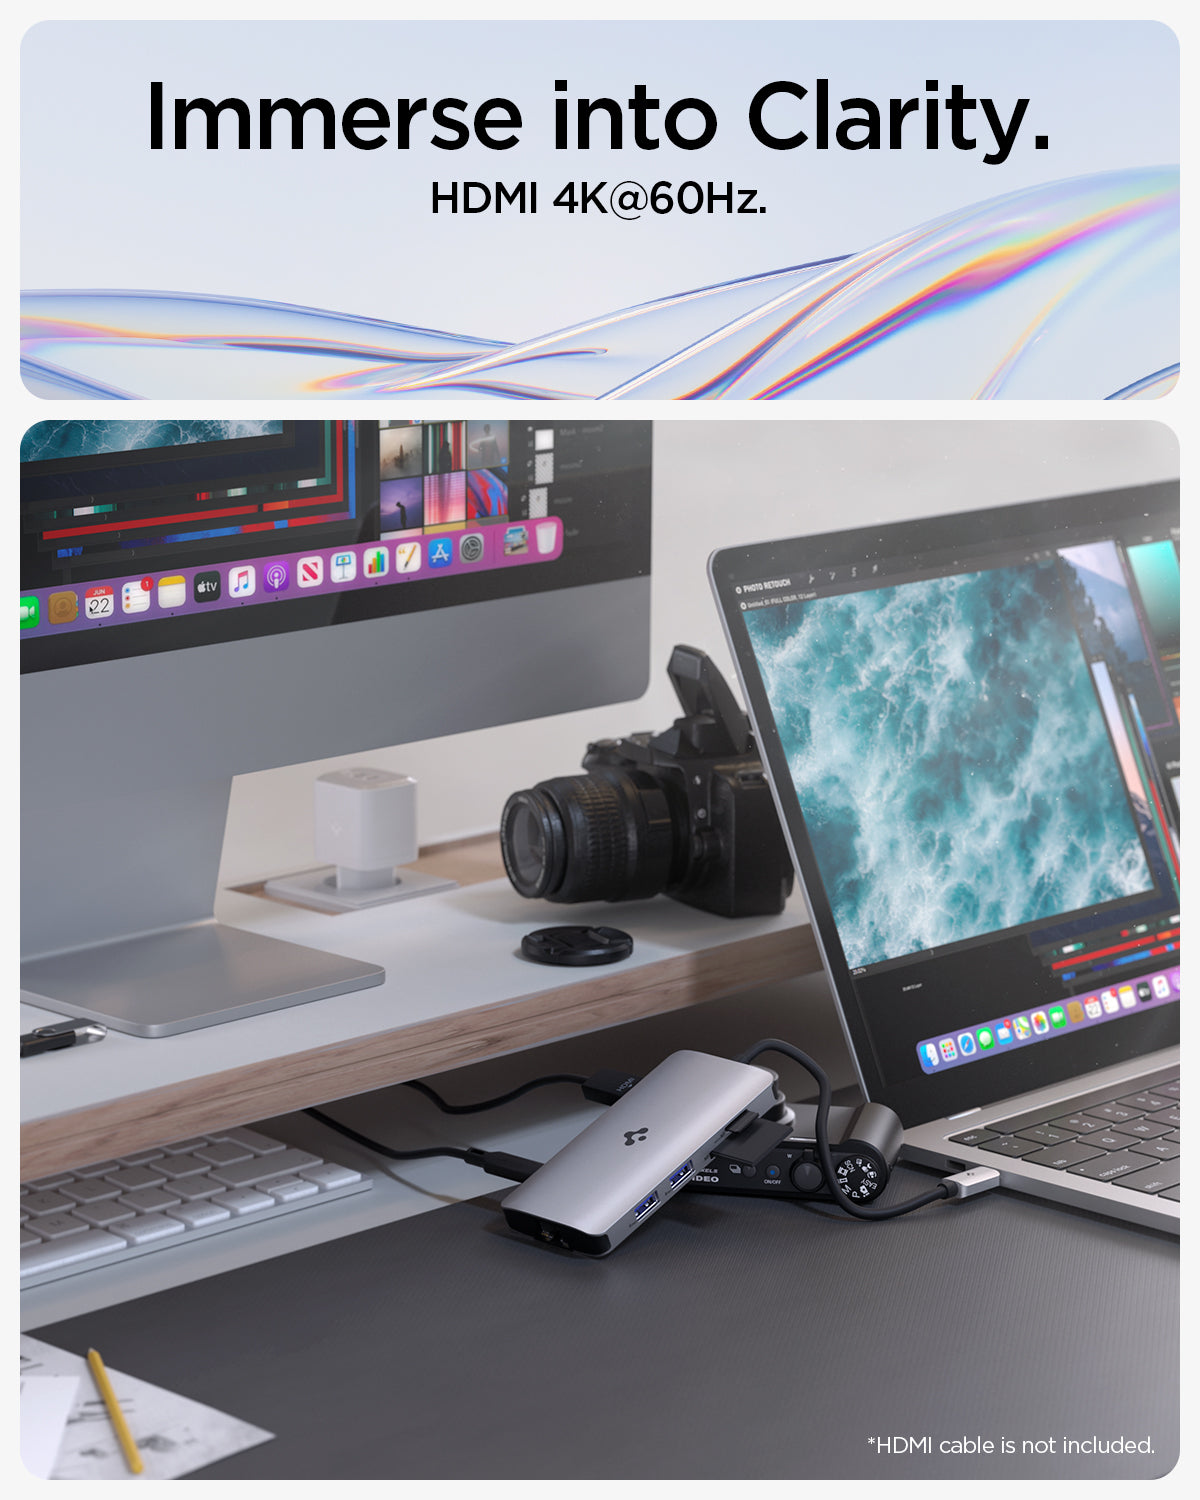 ACA06141 - ArcDock Multi Hub 8-in-1 PD2303 in Space Gray showing the Immerse into Clarity. HDMI 4K@60Hz. Multiple devices attached to a multi hub 